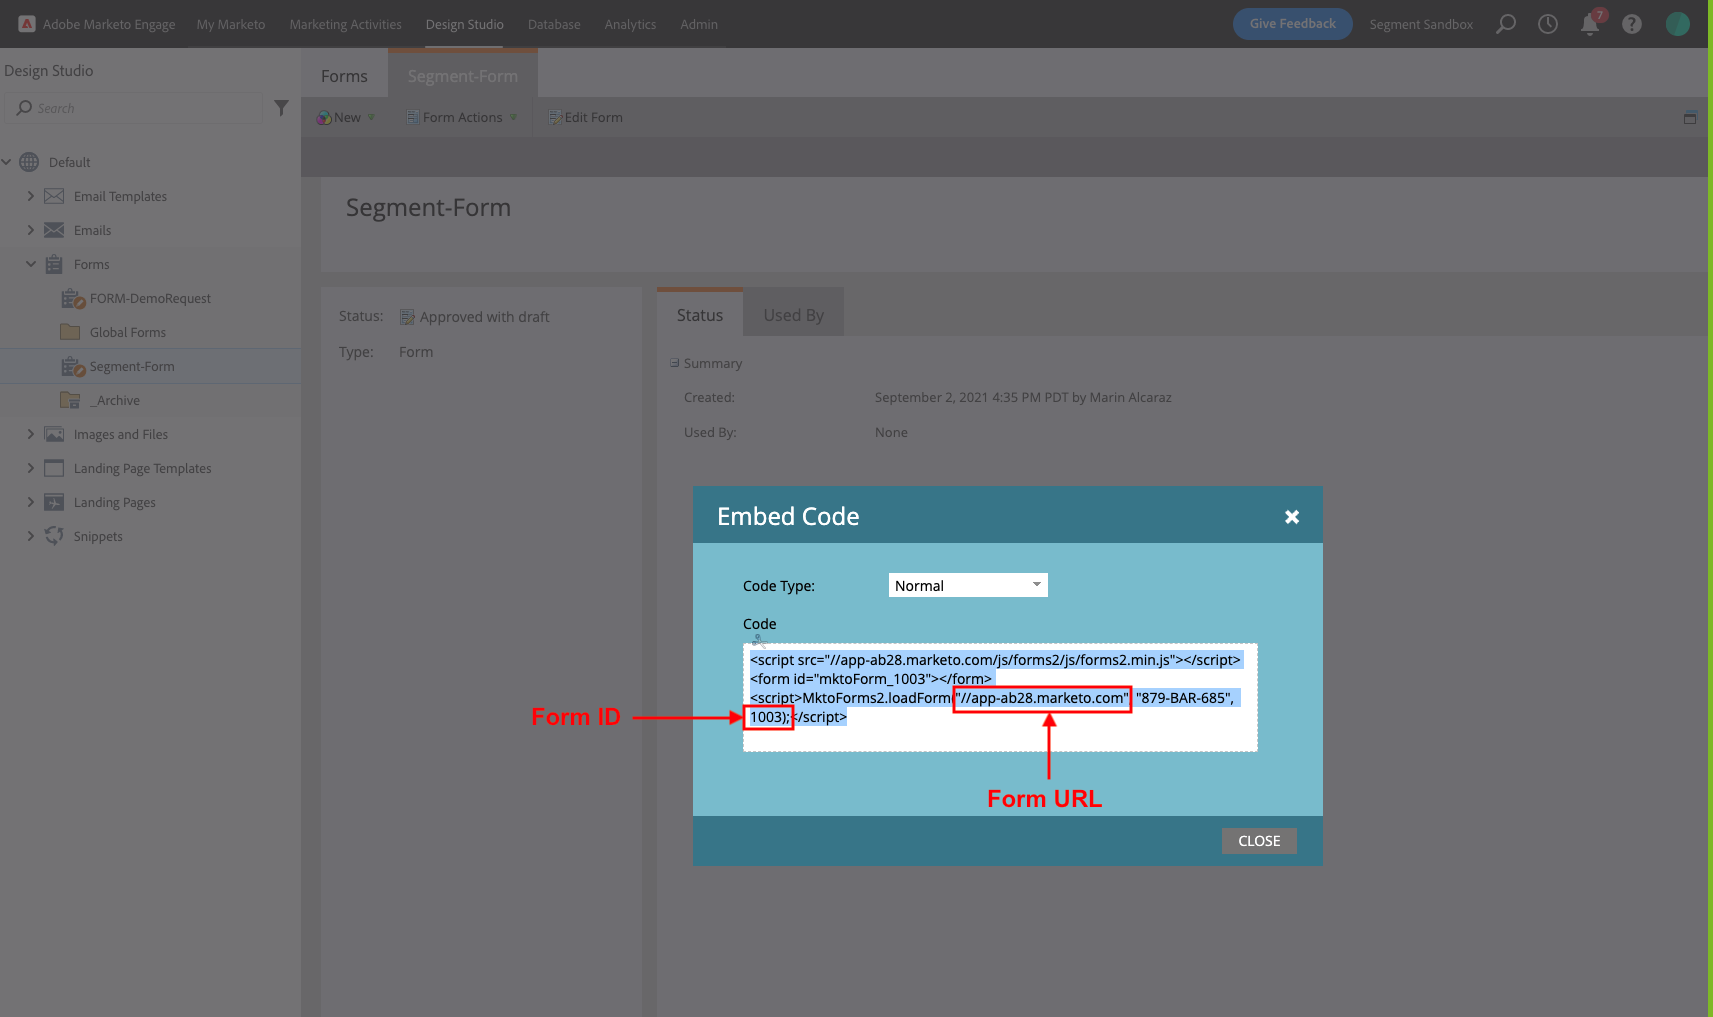 A screenshot of the Embed Code popup in Marketo.